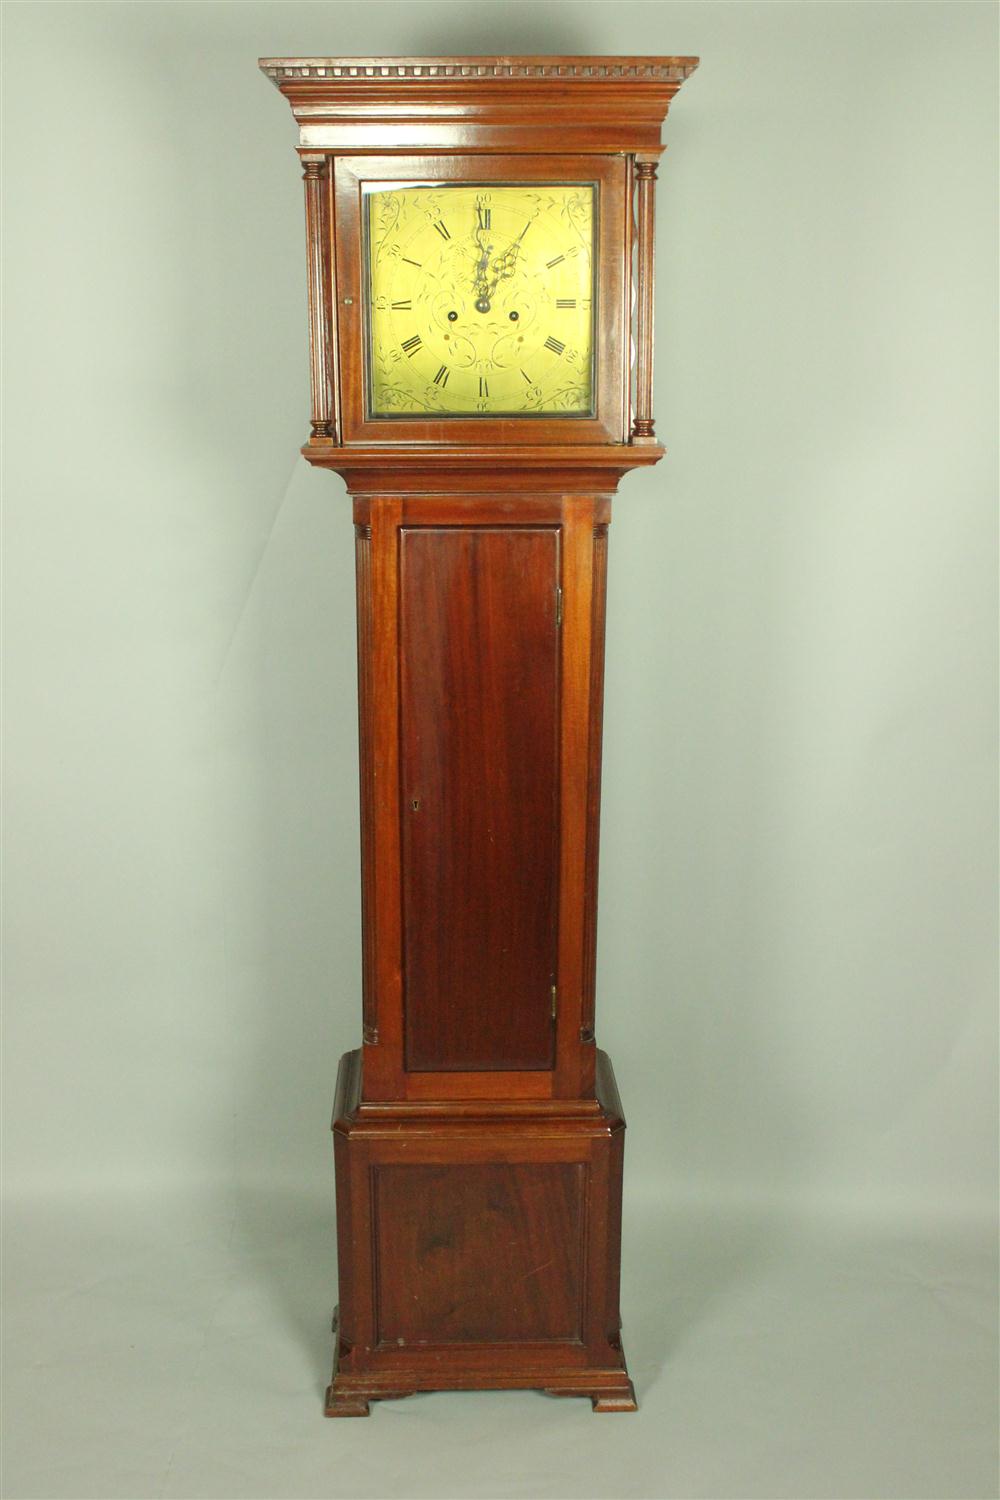 CHIPPENDALE STYLE MAHOGANY TALL 146d3e